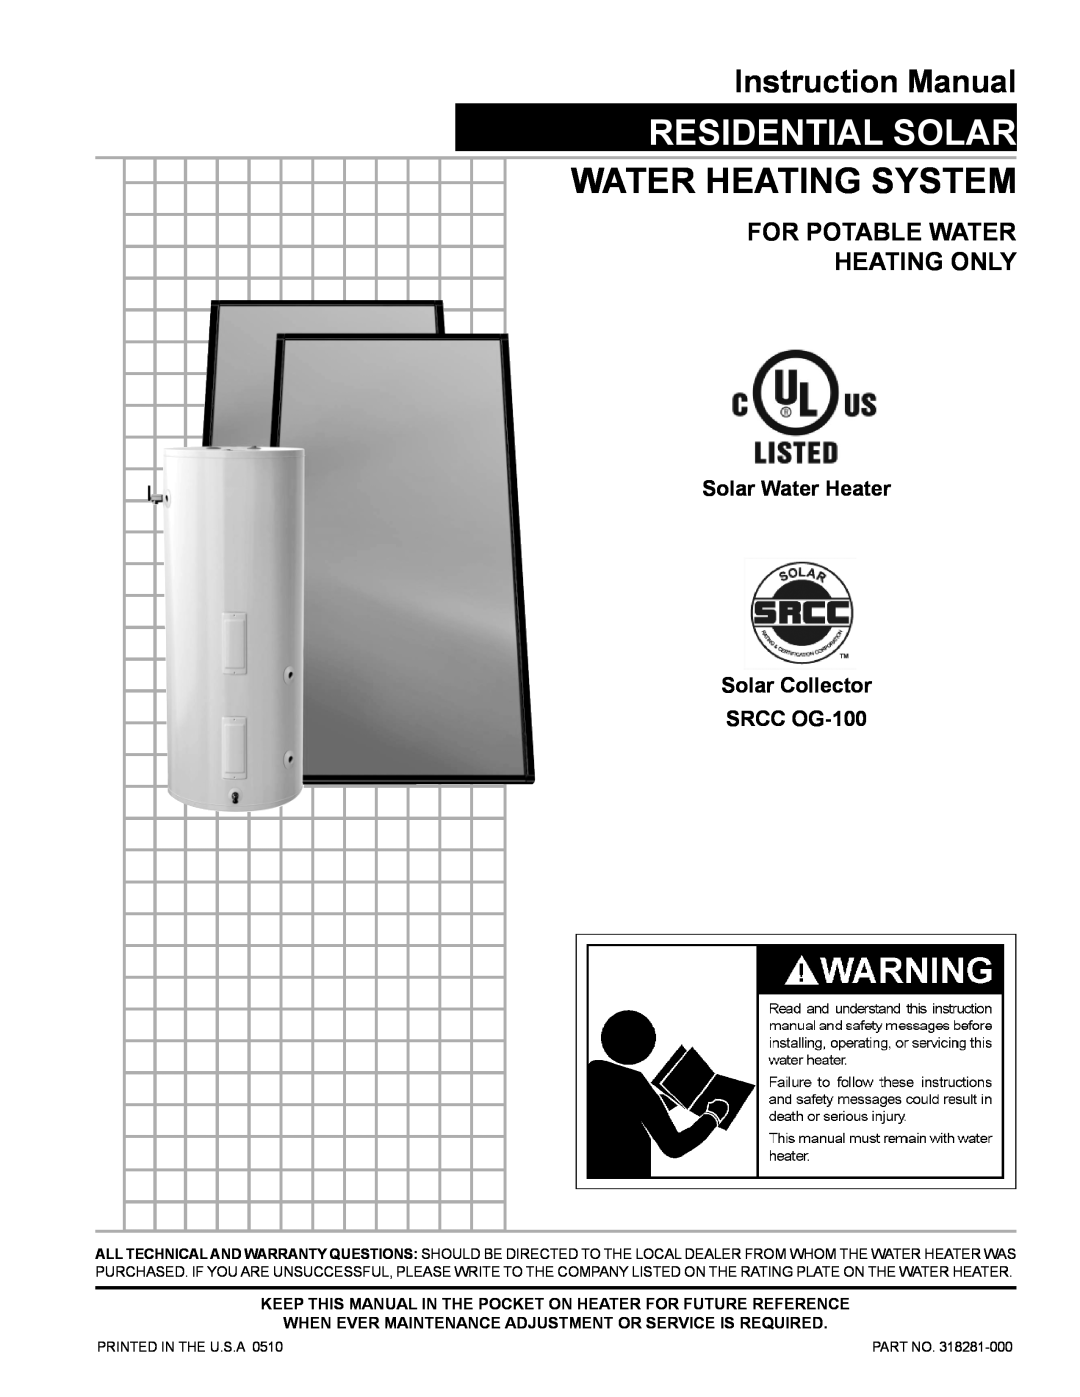 American Water Heater 318281-000 instruction manual Solar Water Heater Solar Collector SRCC OG-100, Residential Solar 